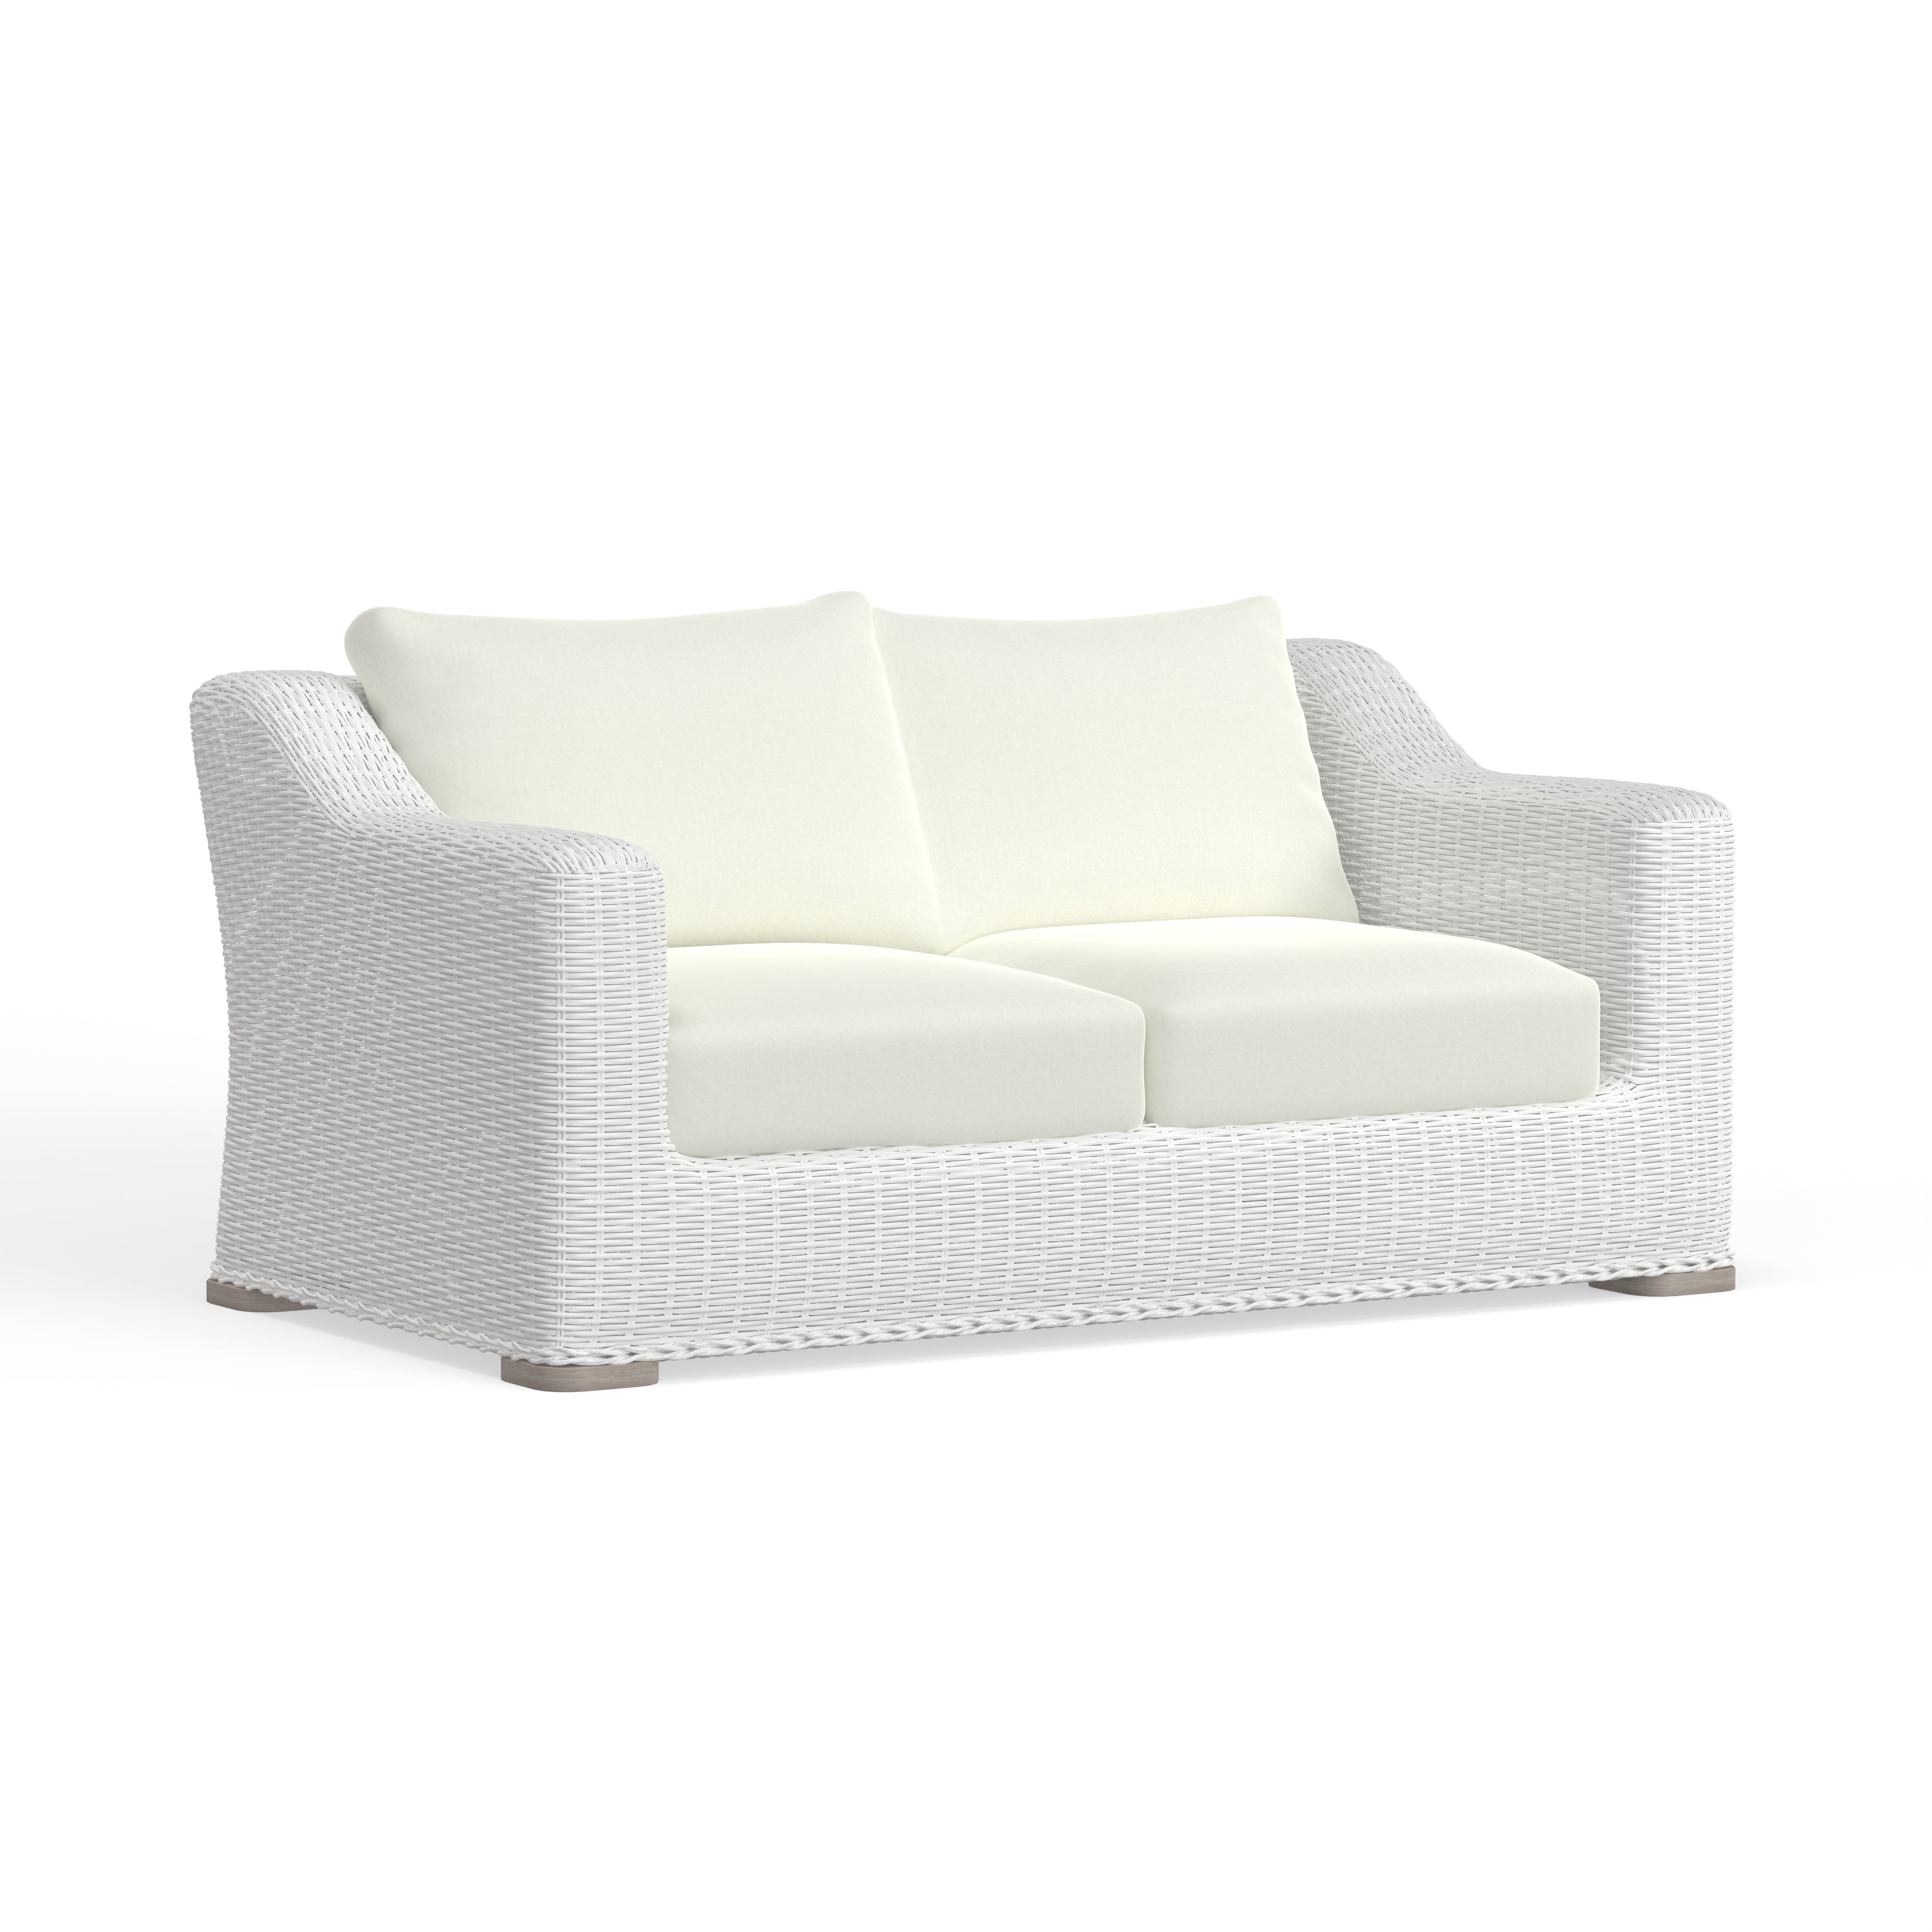 White Wicker Seating Set For Outdoors